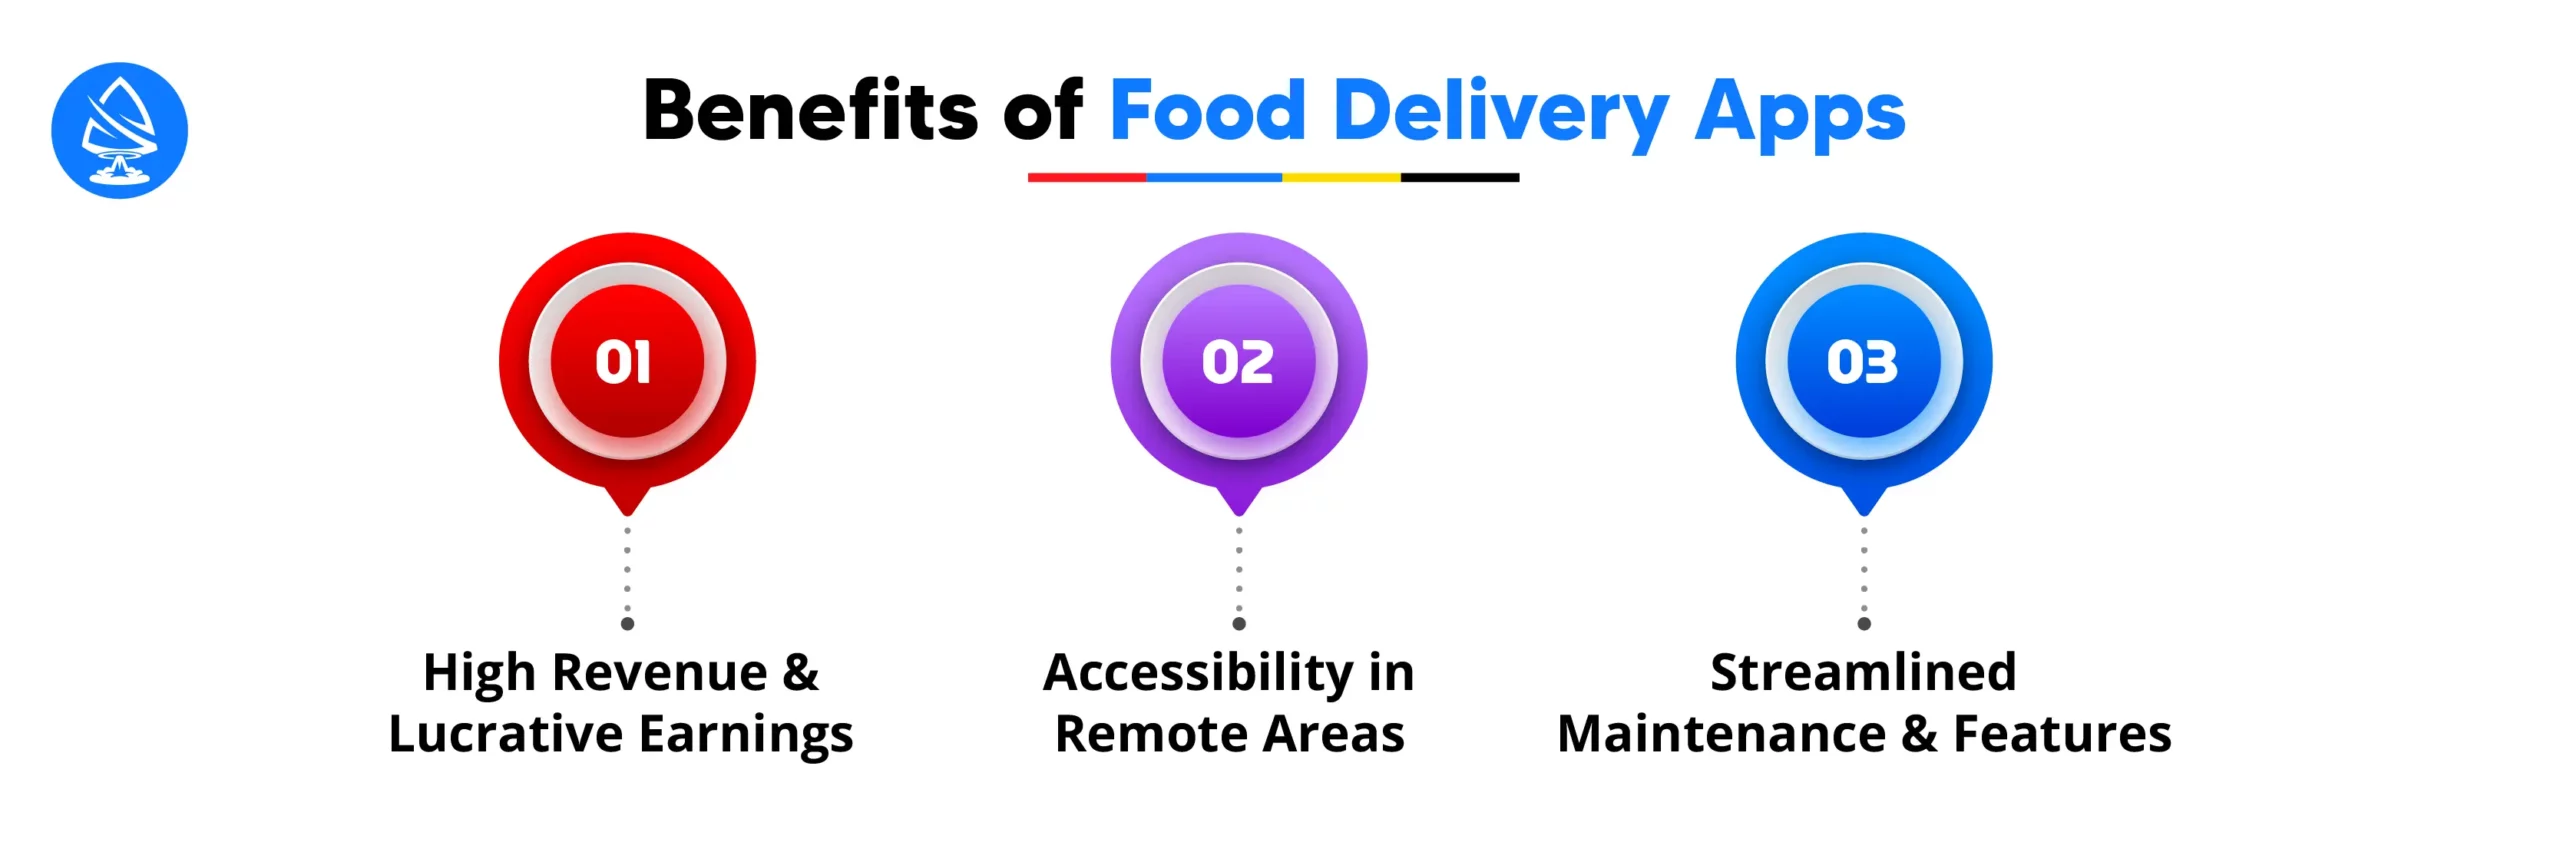 Benefits of Food Delivery Apps